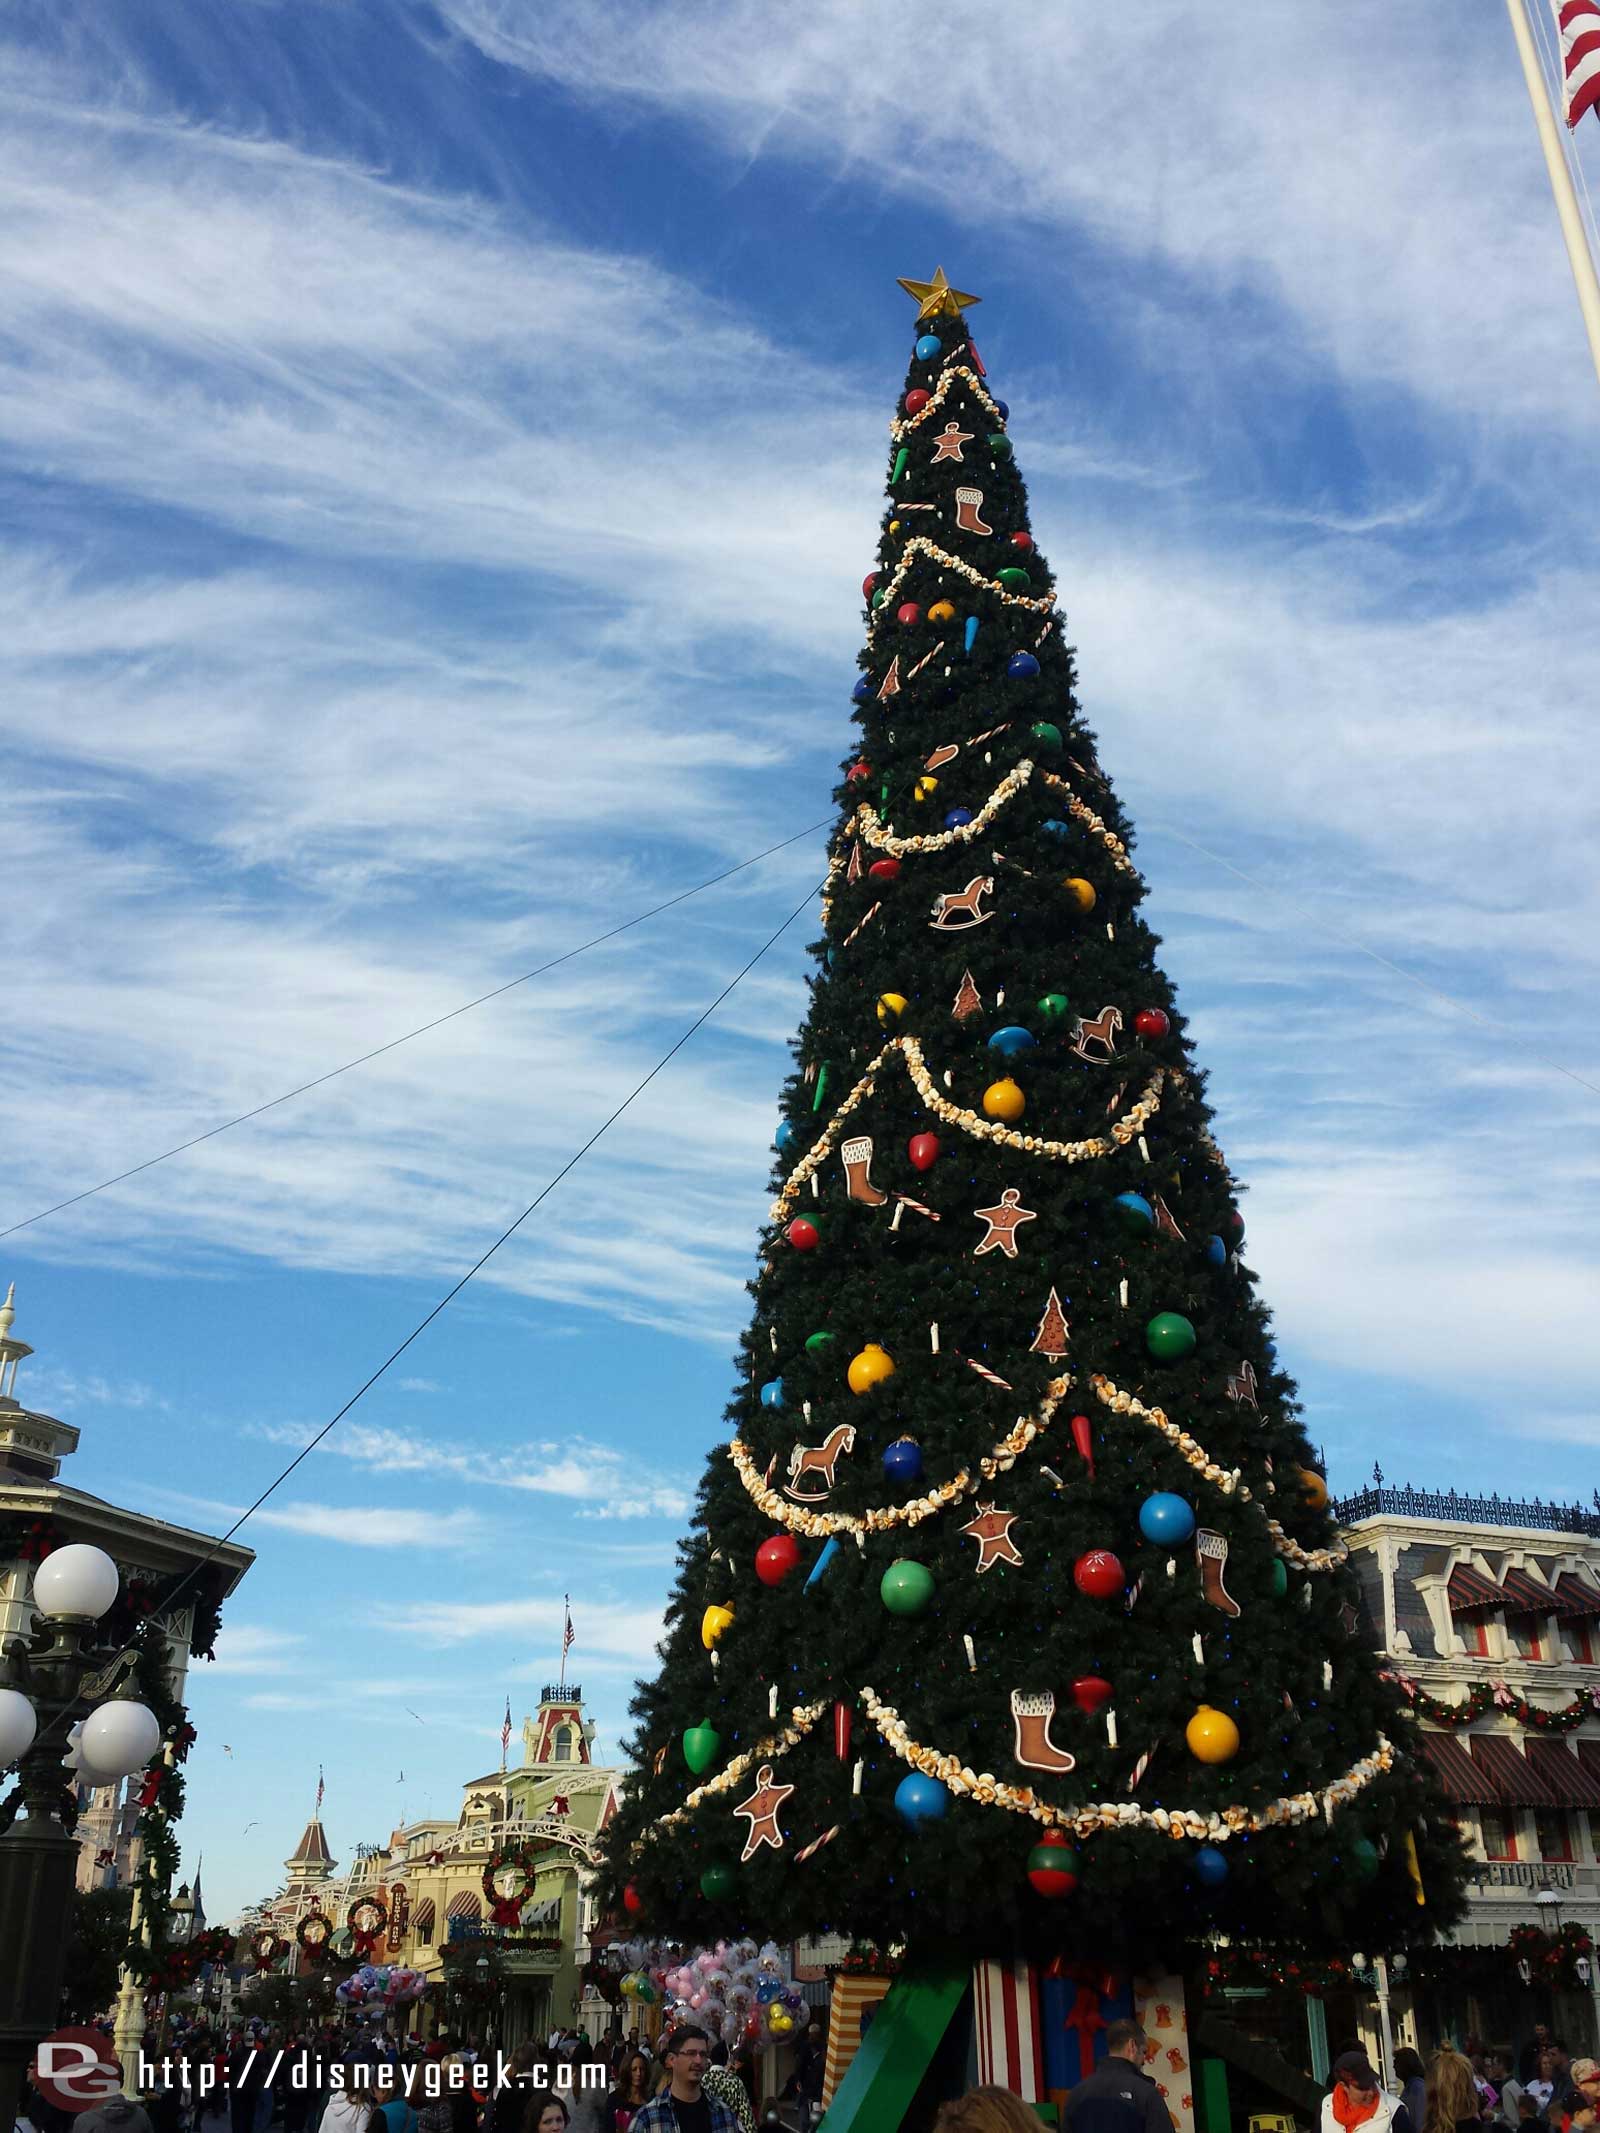 The tree in Town Square at the Magic Kingdom has been installed.